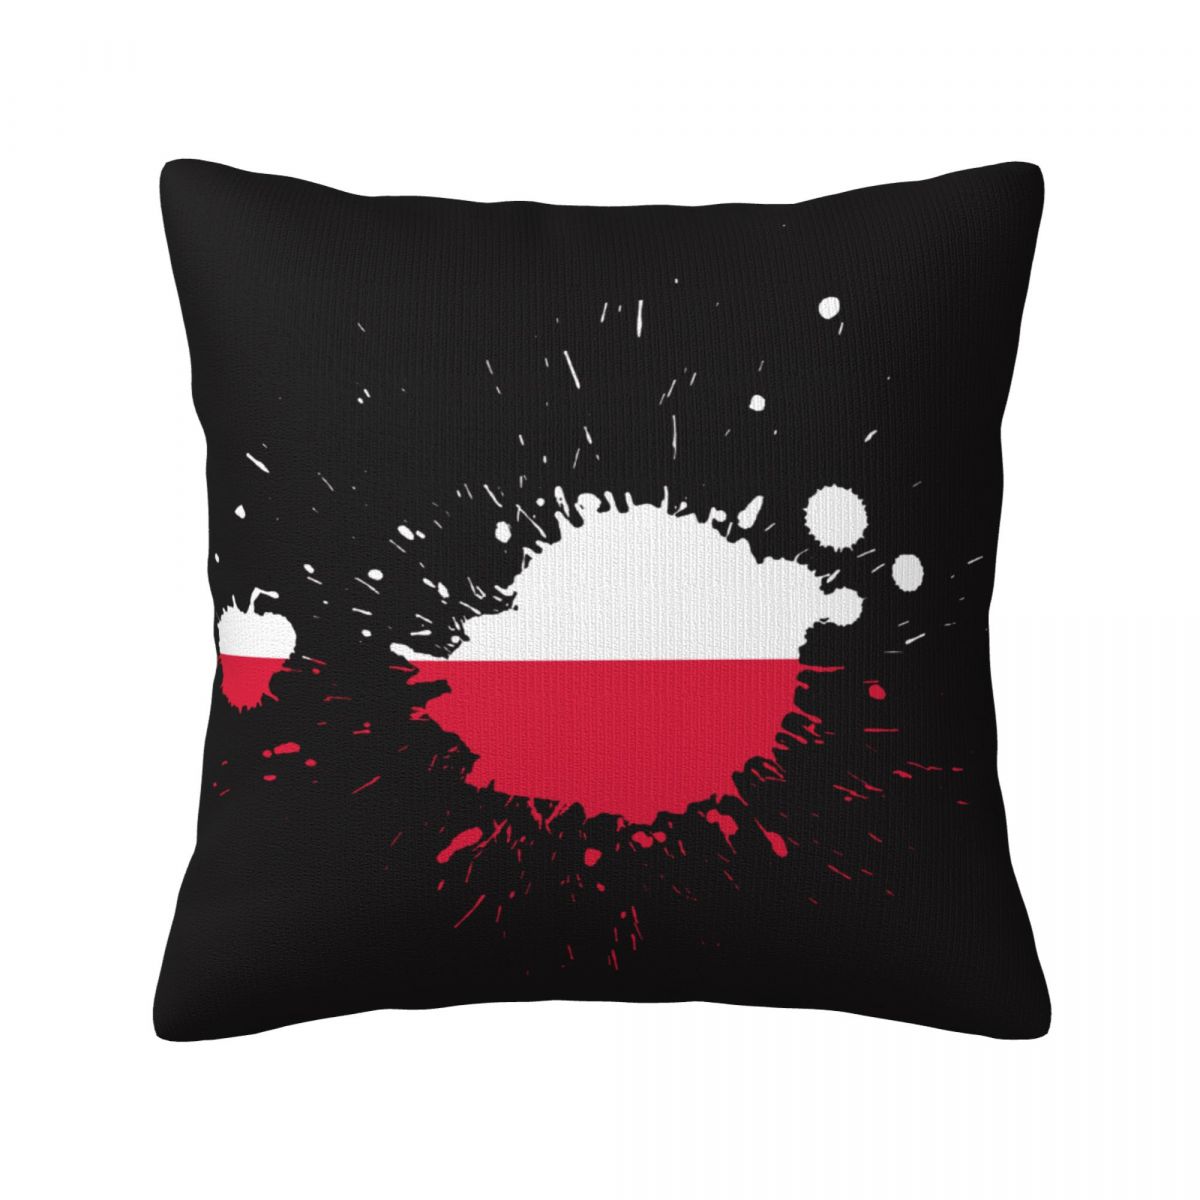 Poland Ink Spatter Decorative Square Throw Pillow Covers